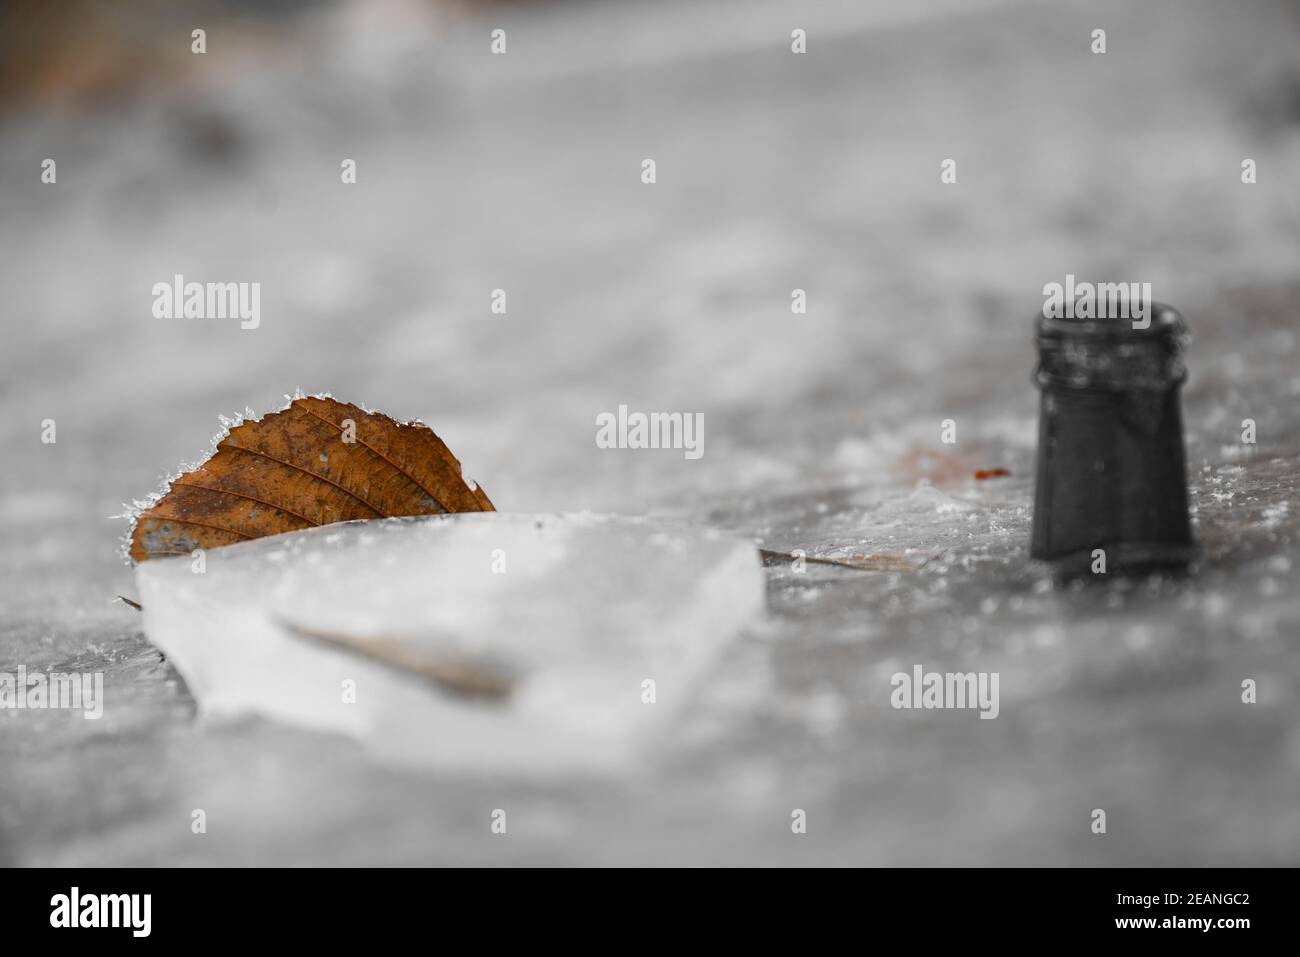 Leaf frozen in ice - highlight Stock Photo